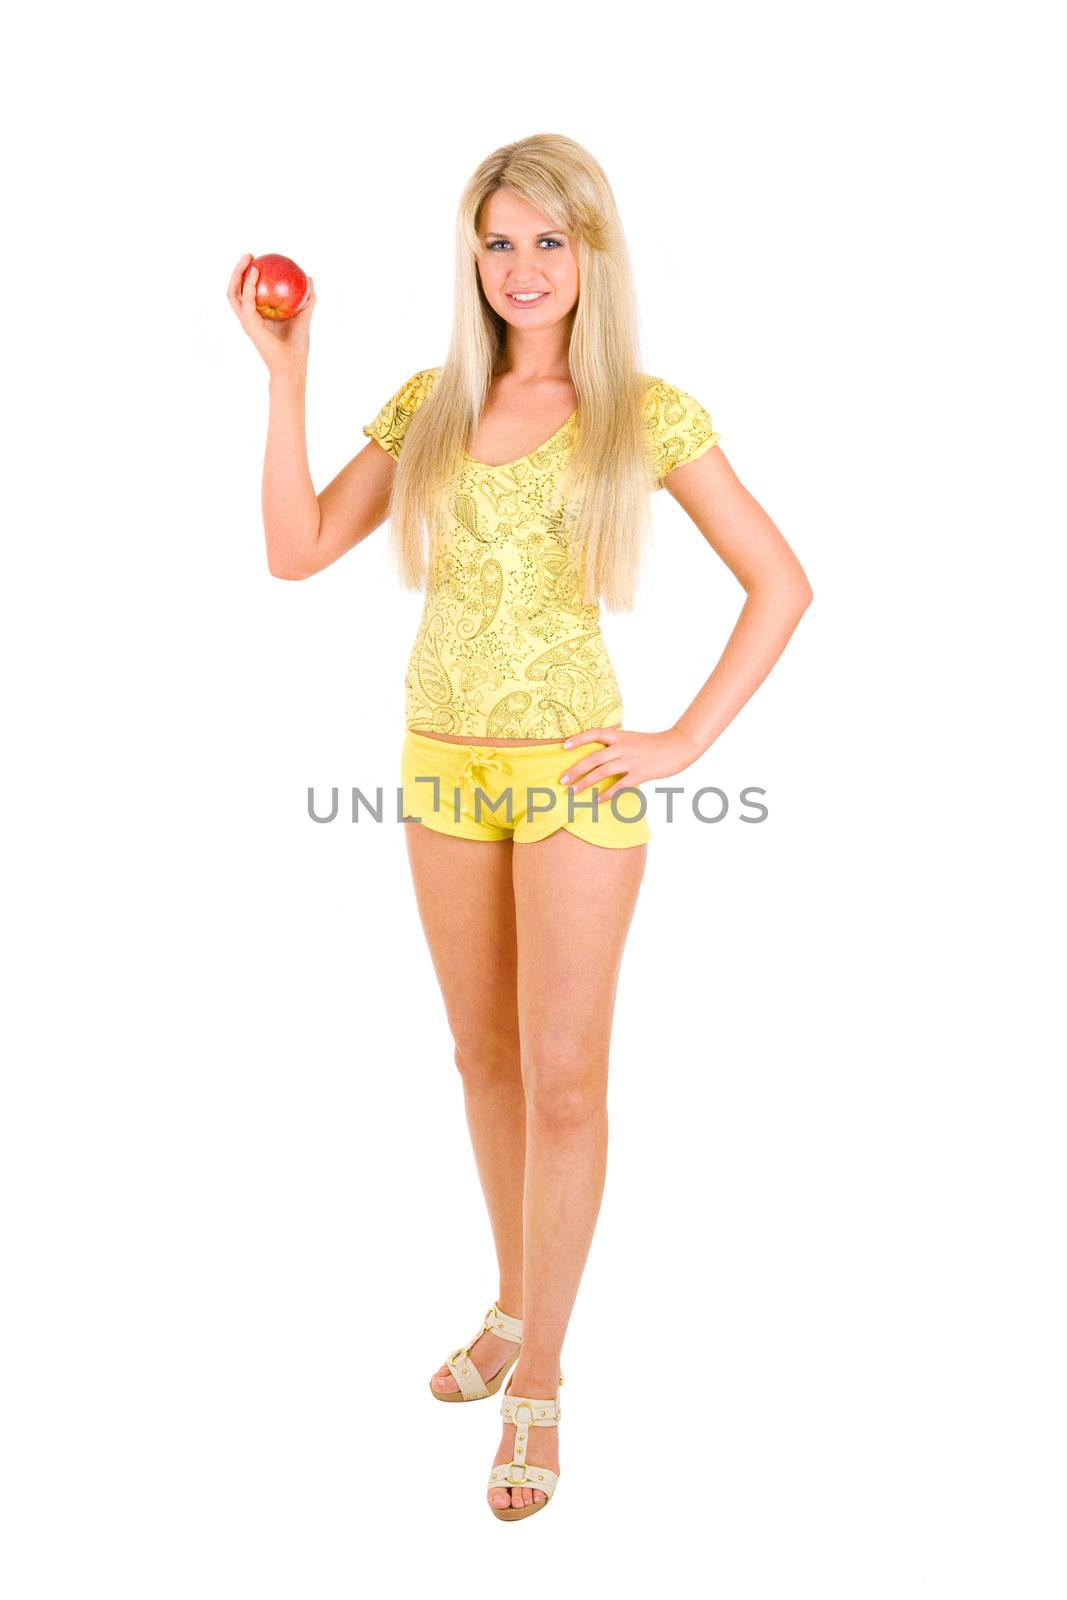 long haired and long legs blond sportive girl with an apple